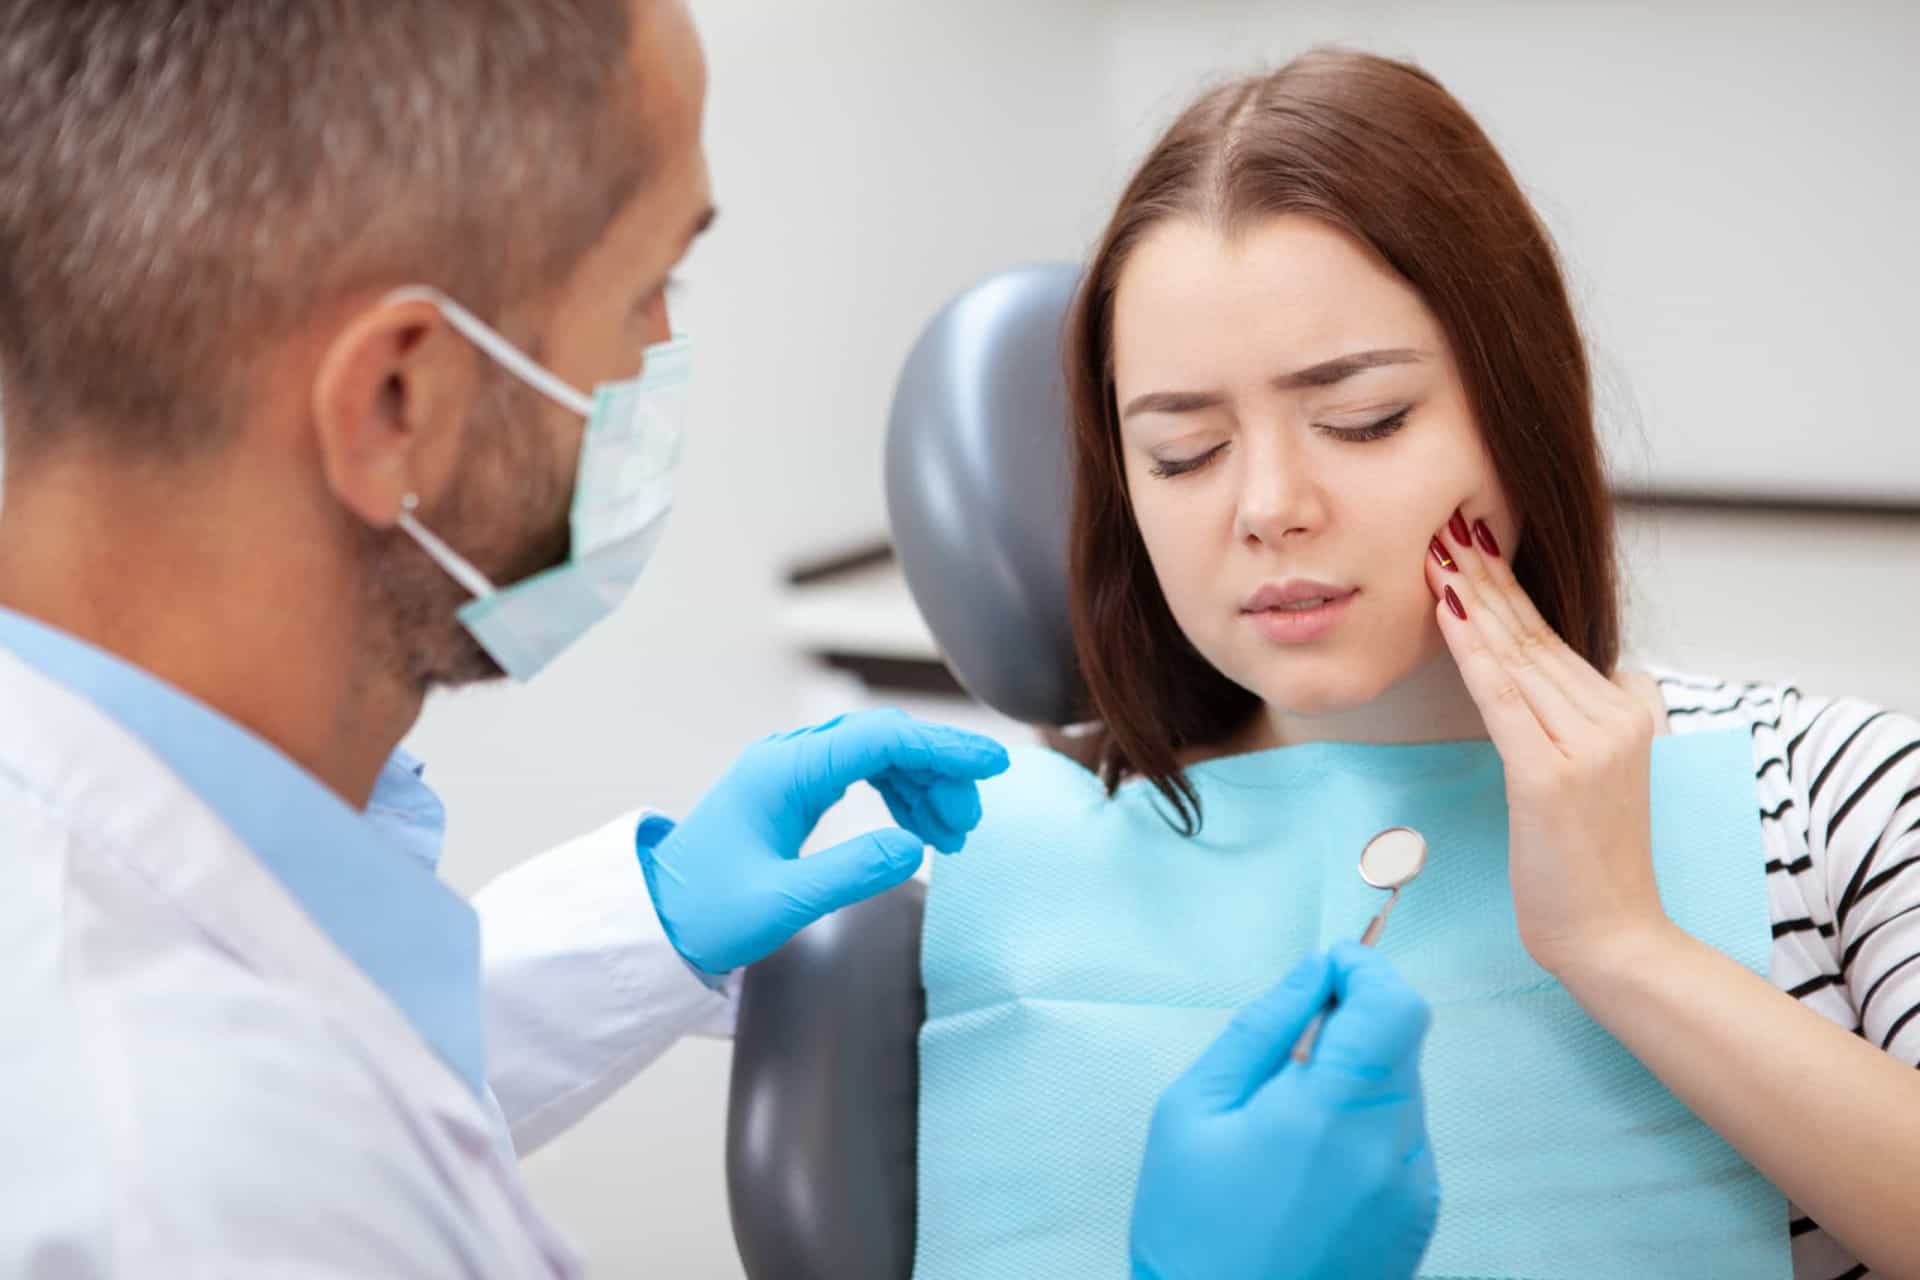 <p>In addition, sometimes dentists need to know if, when, and where you feel pain. If you mask your pain with medication, you won’t be able to give your dentist the feedback he/she needs.</p><p><a href="https://www.msn.com/en-us/community/channel/vid-7xx8mnucu55yw63we9va2gwr7uihbxwc68fxqp25x6tg4ftibpra?cvid=94631541bc0f4f89bfd59158d696ad7e">Follow us and access great exclusive content everyday</a></p>